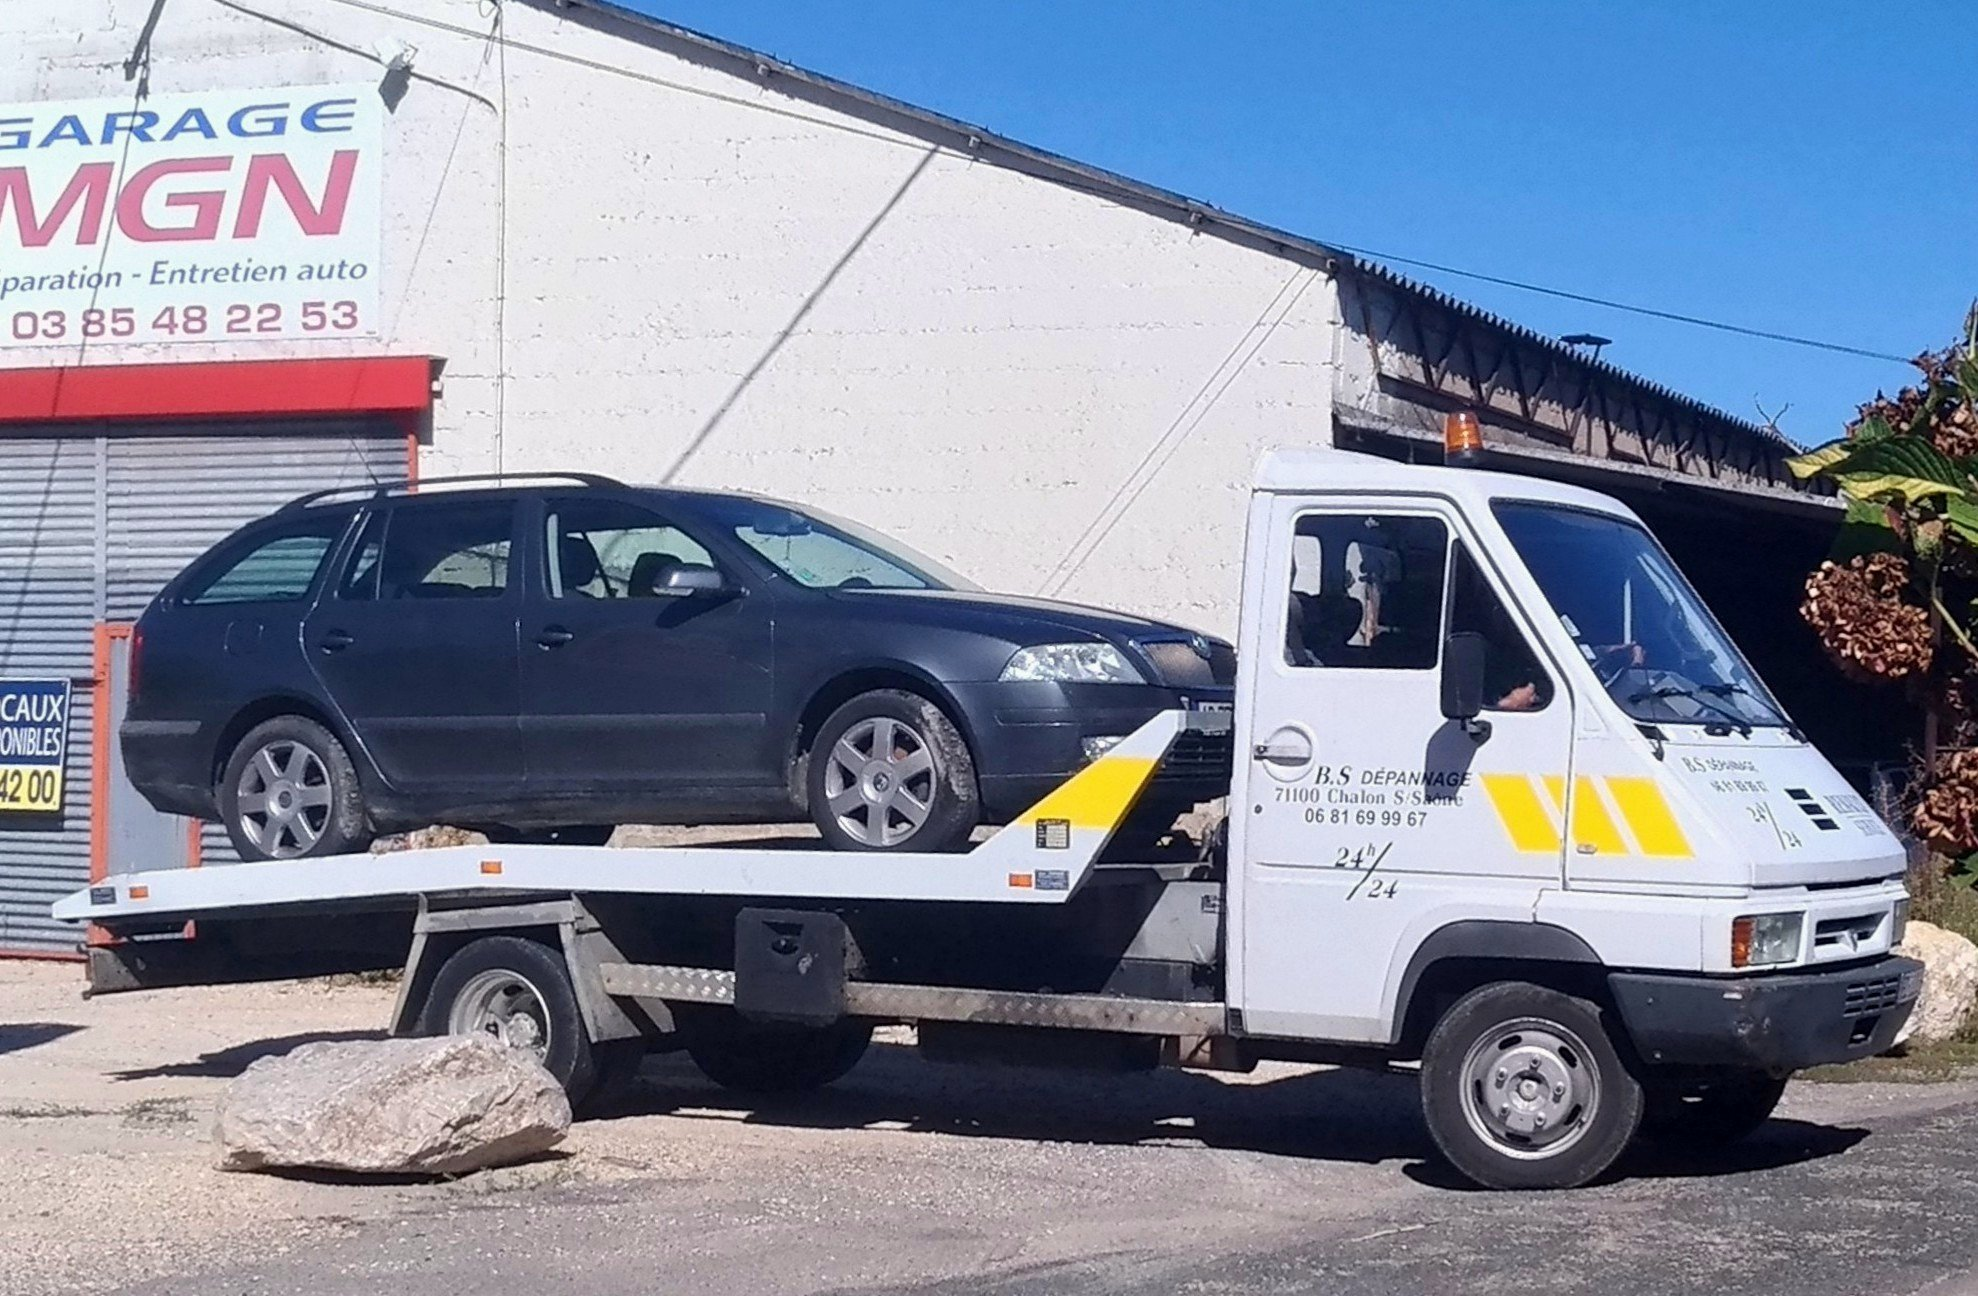 A tow truck driver picking up a junk car without a title